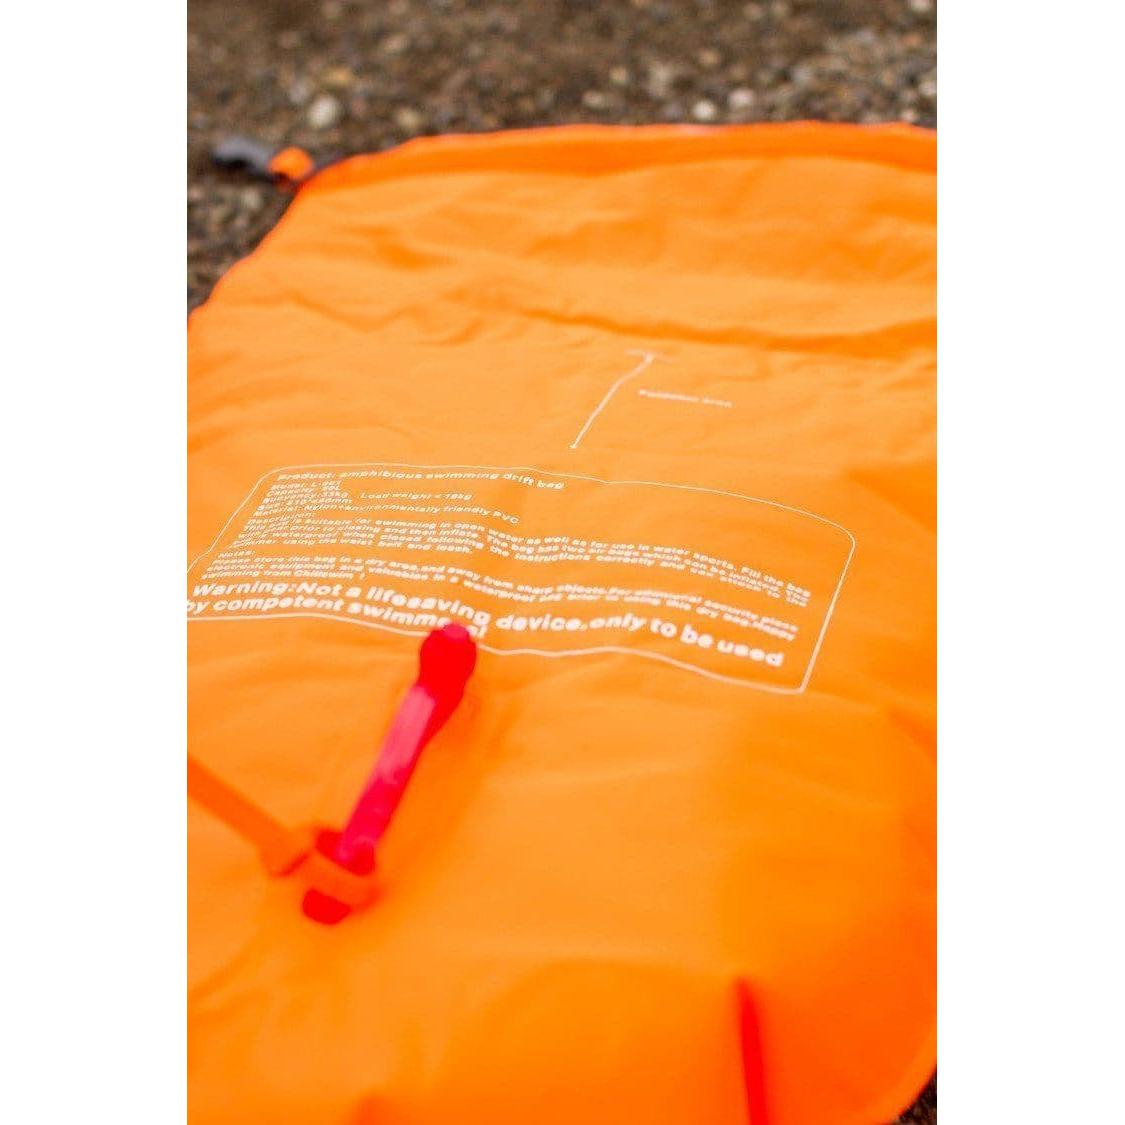 Dry Bag 20L Small Swim Secure Open Water Swimming